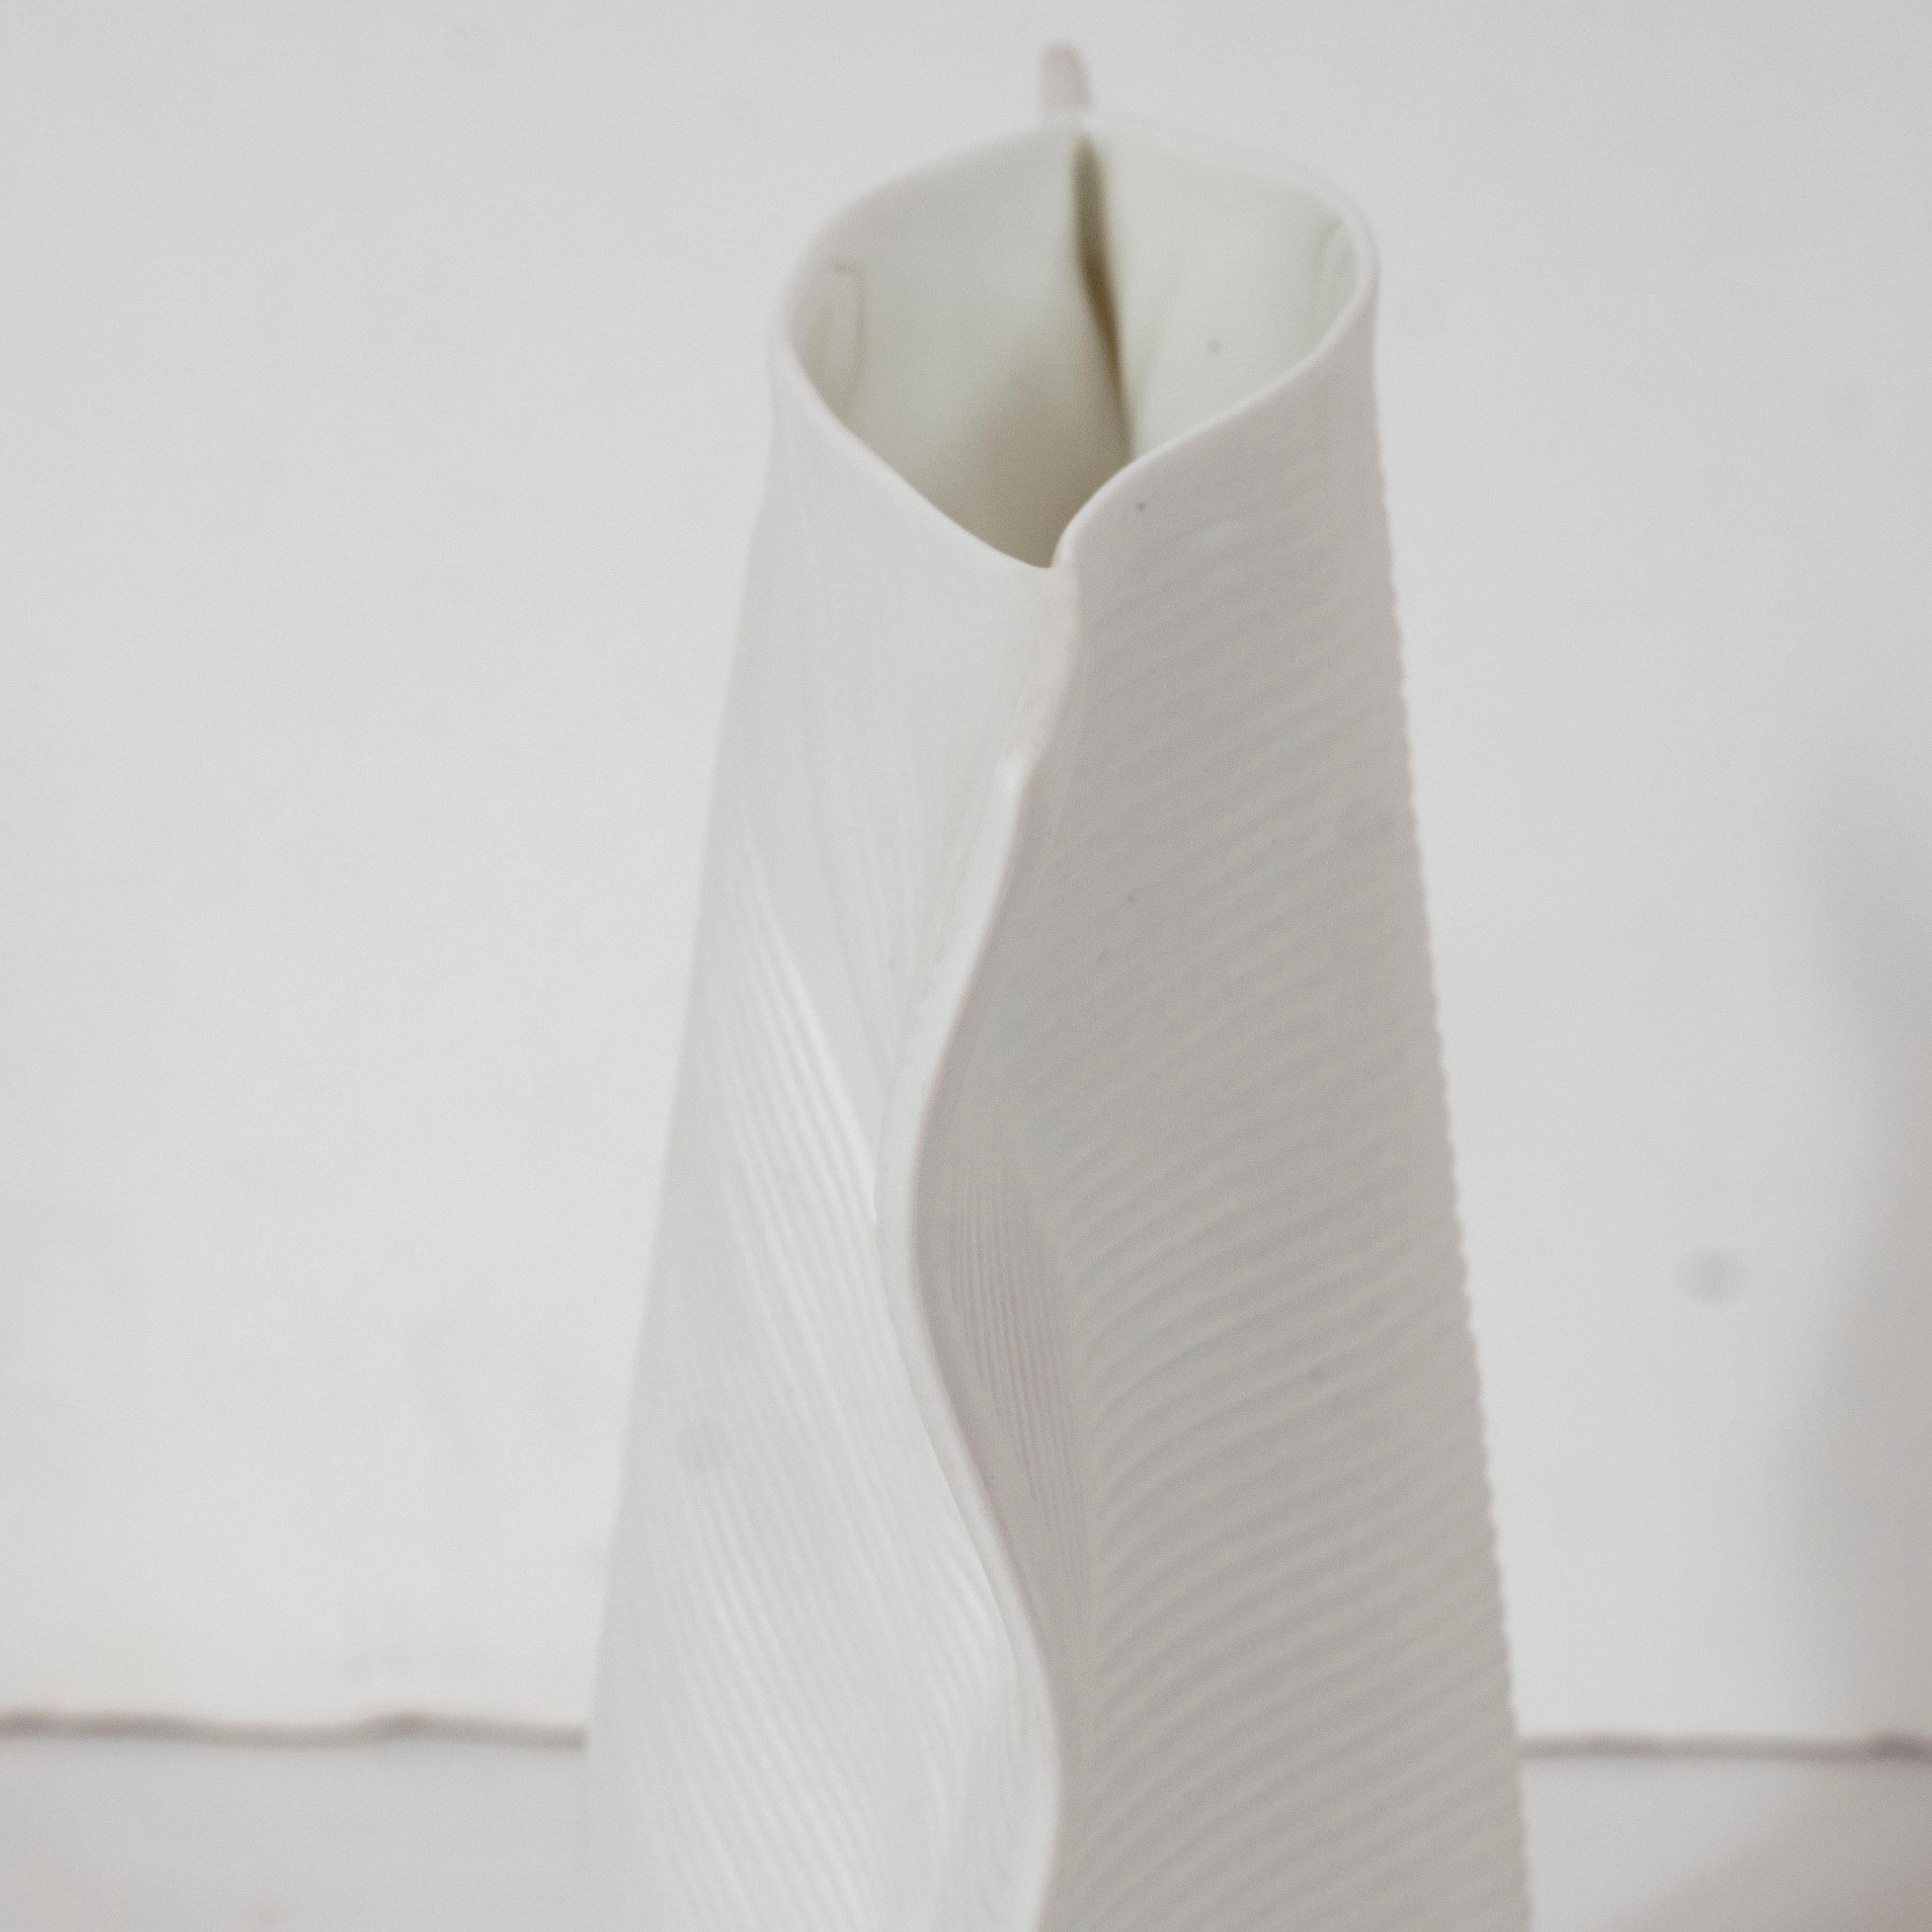 Late 20th Century Mid-Century Modern Sculptural White Ceramic Vase by Johan van Loon for Rosenthal